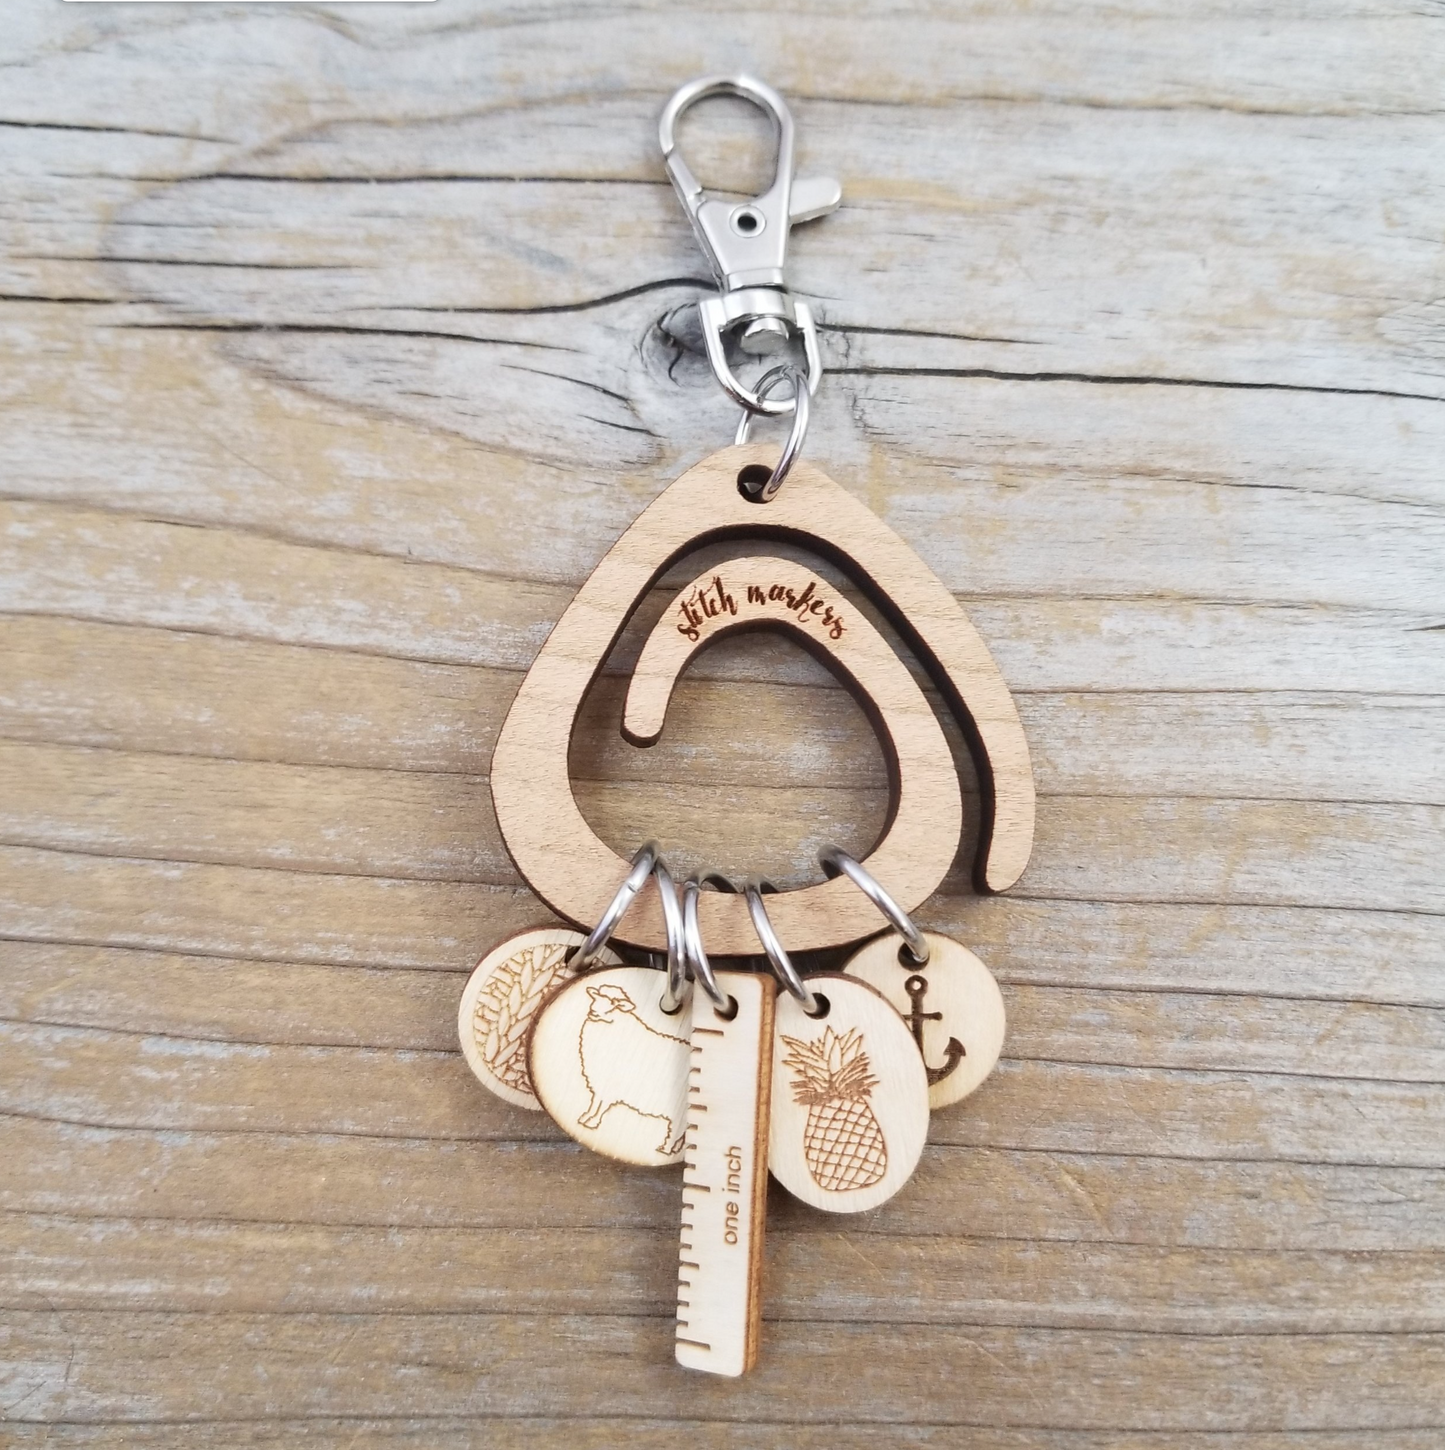 Stitch Marker Holder Pin with Acorn Charm – Katrinkles - retail